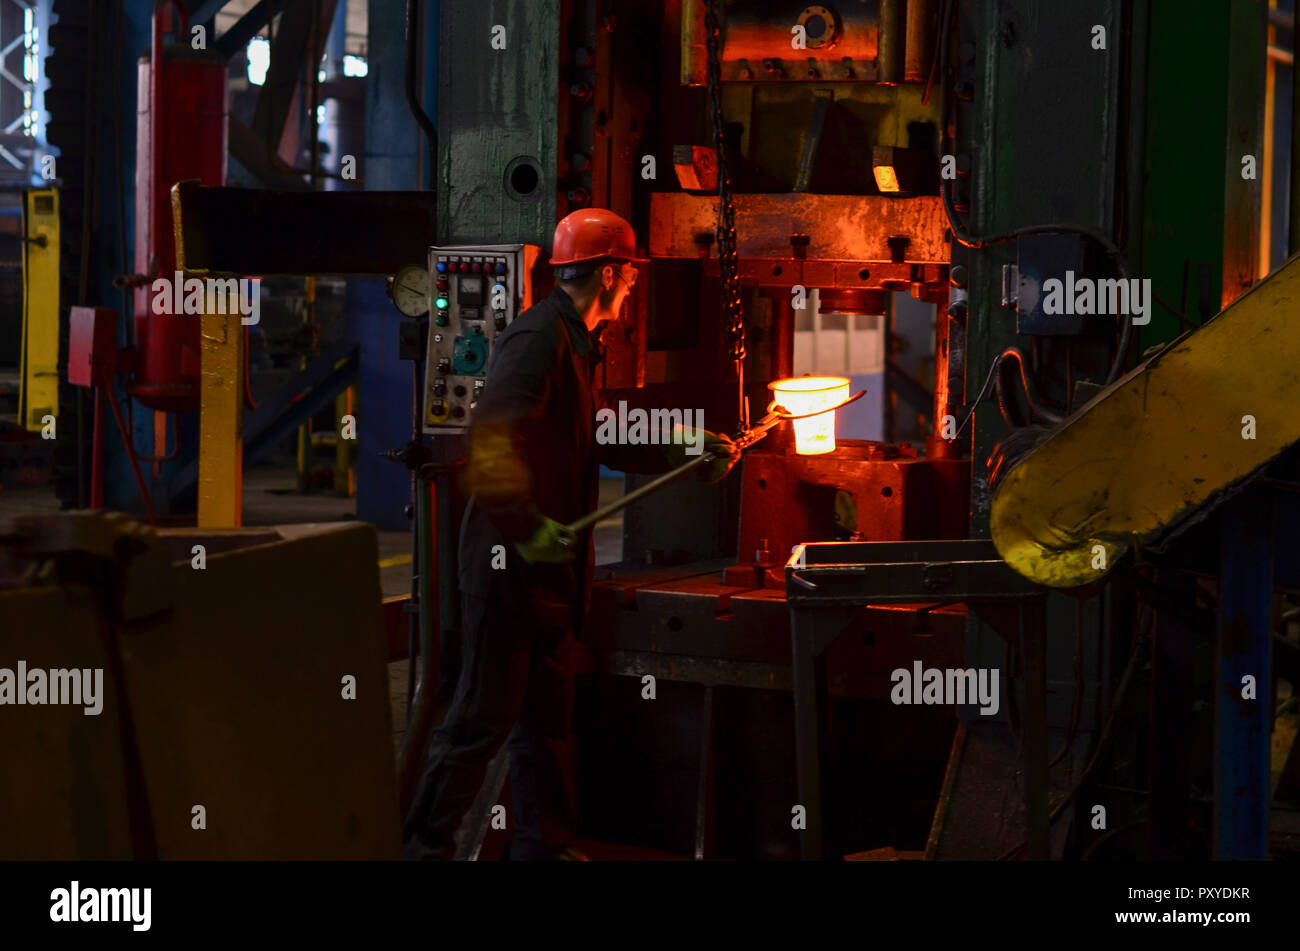 Hot metal ingot being loaded into a hammer forge. Worker forges iron products Stock Photo